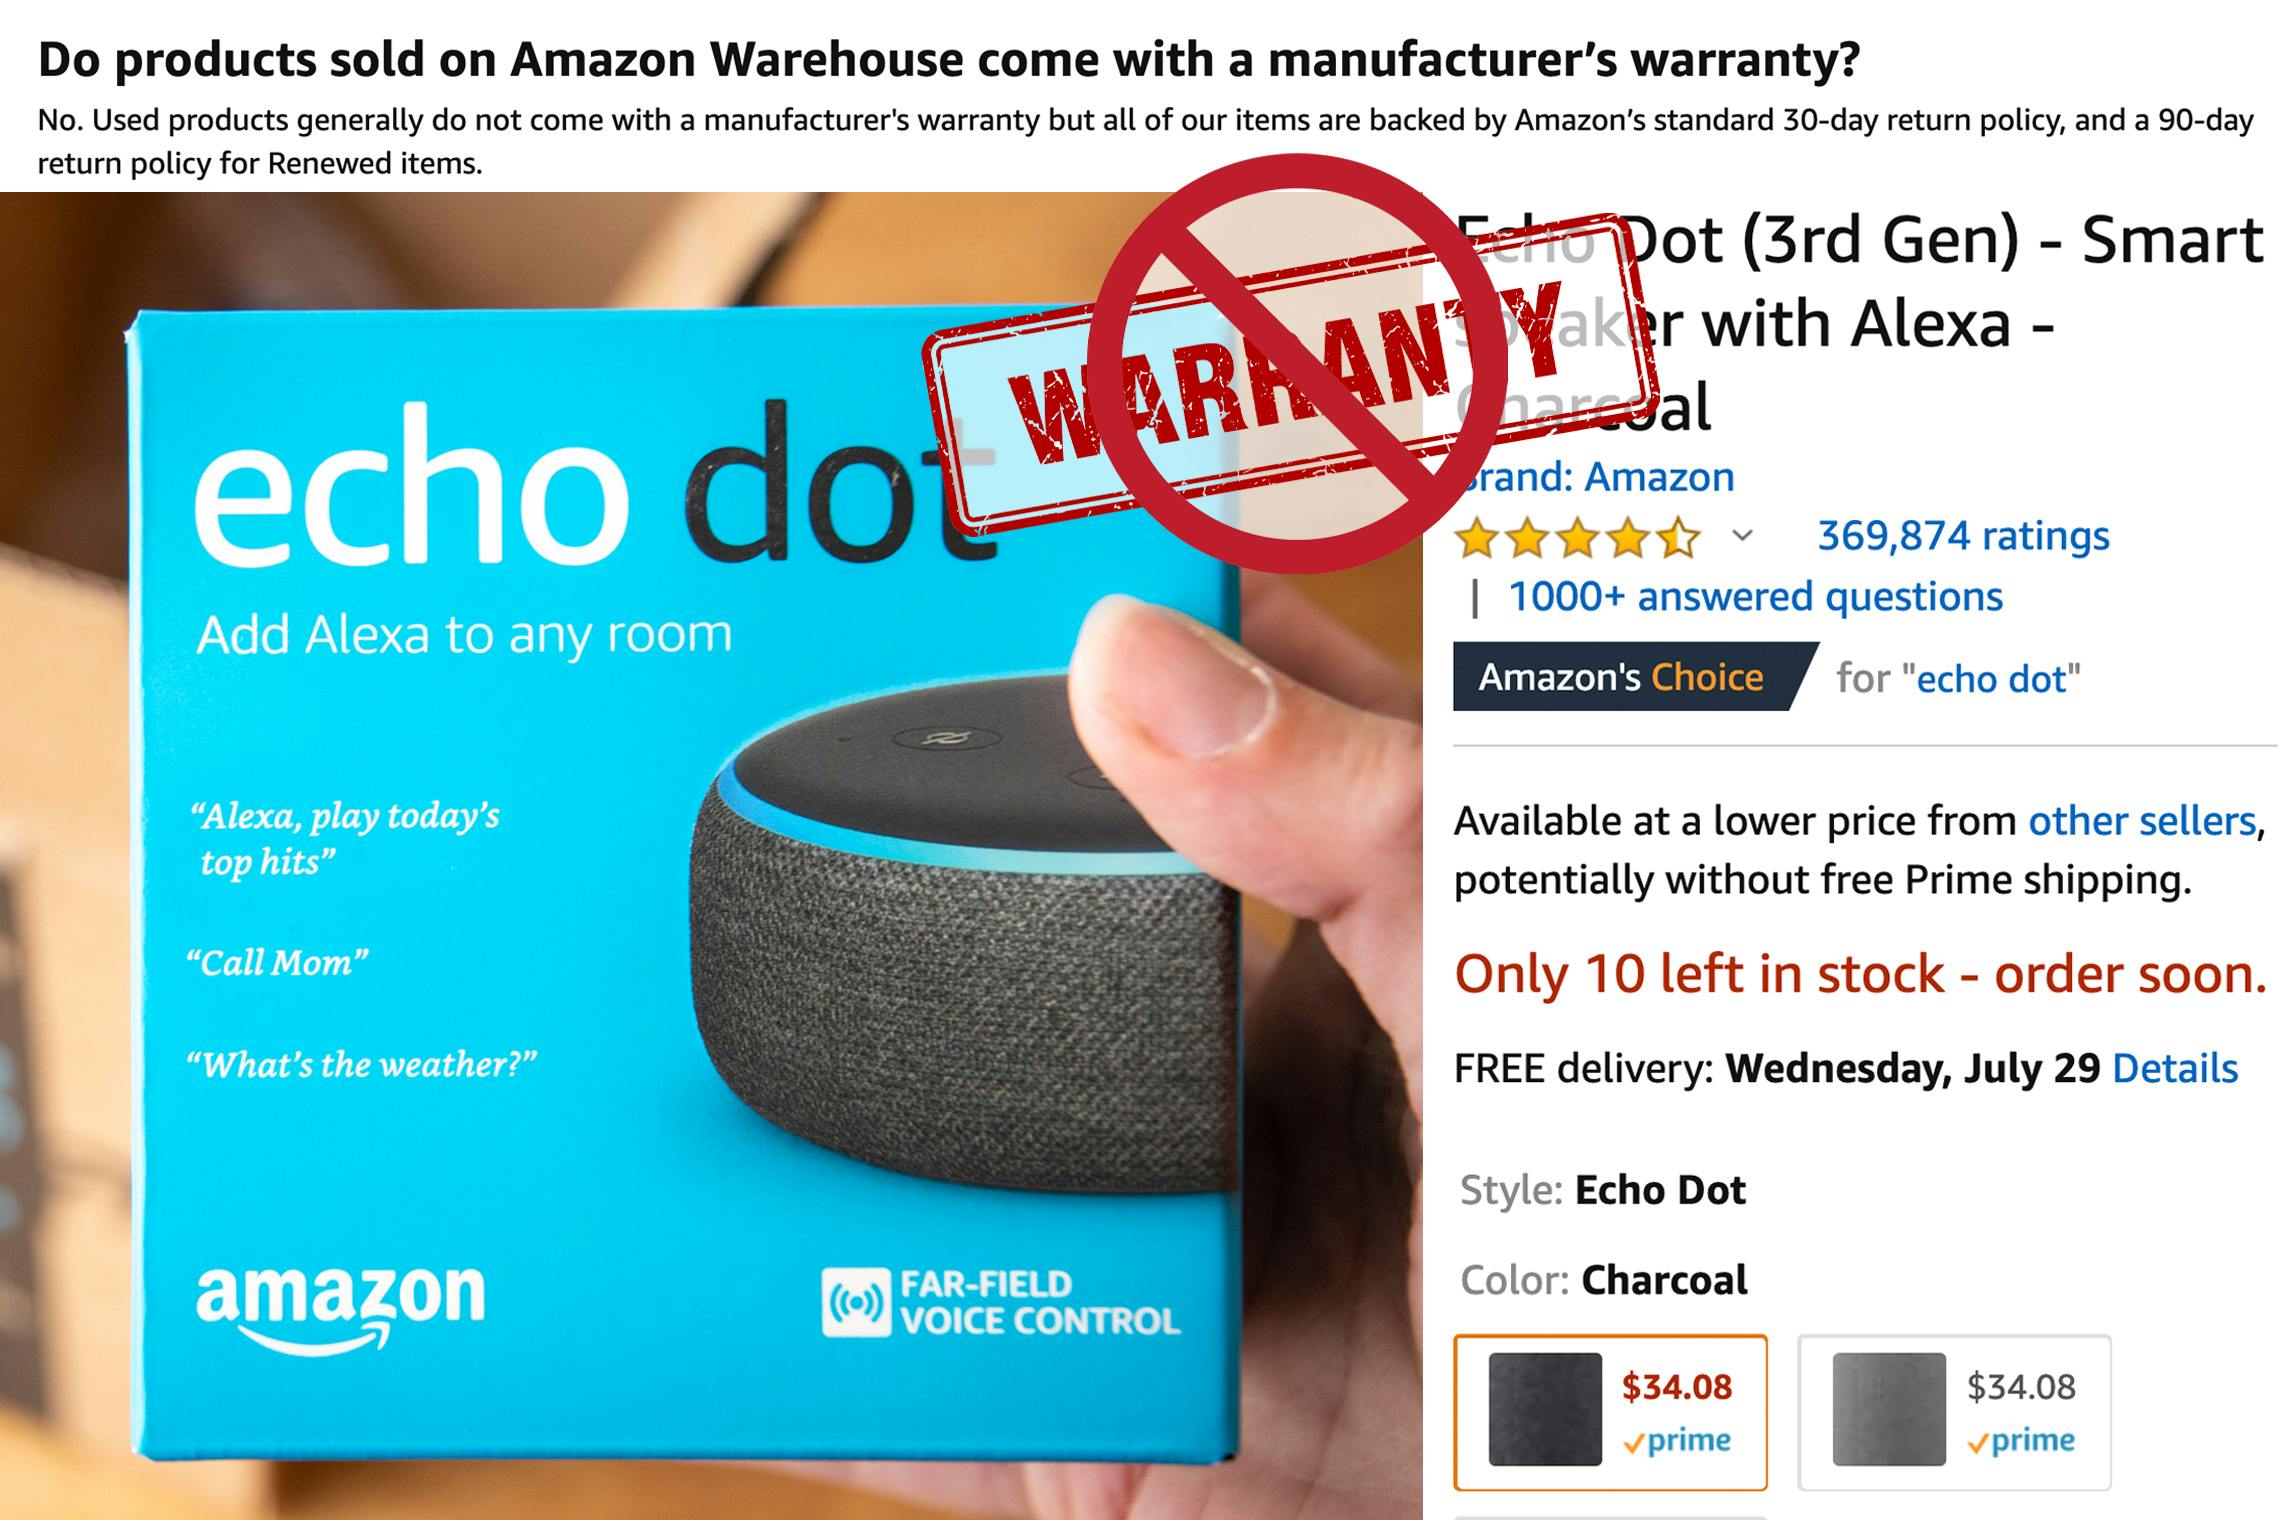 Amazon graphic showing no warranty for amazon warehouse products. 